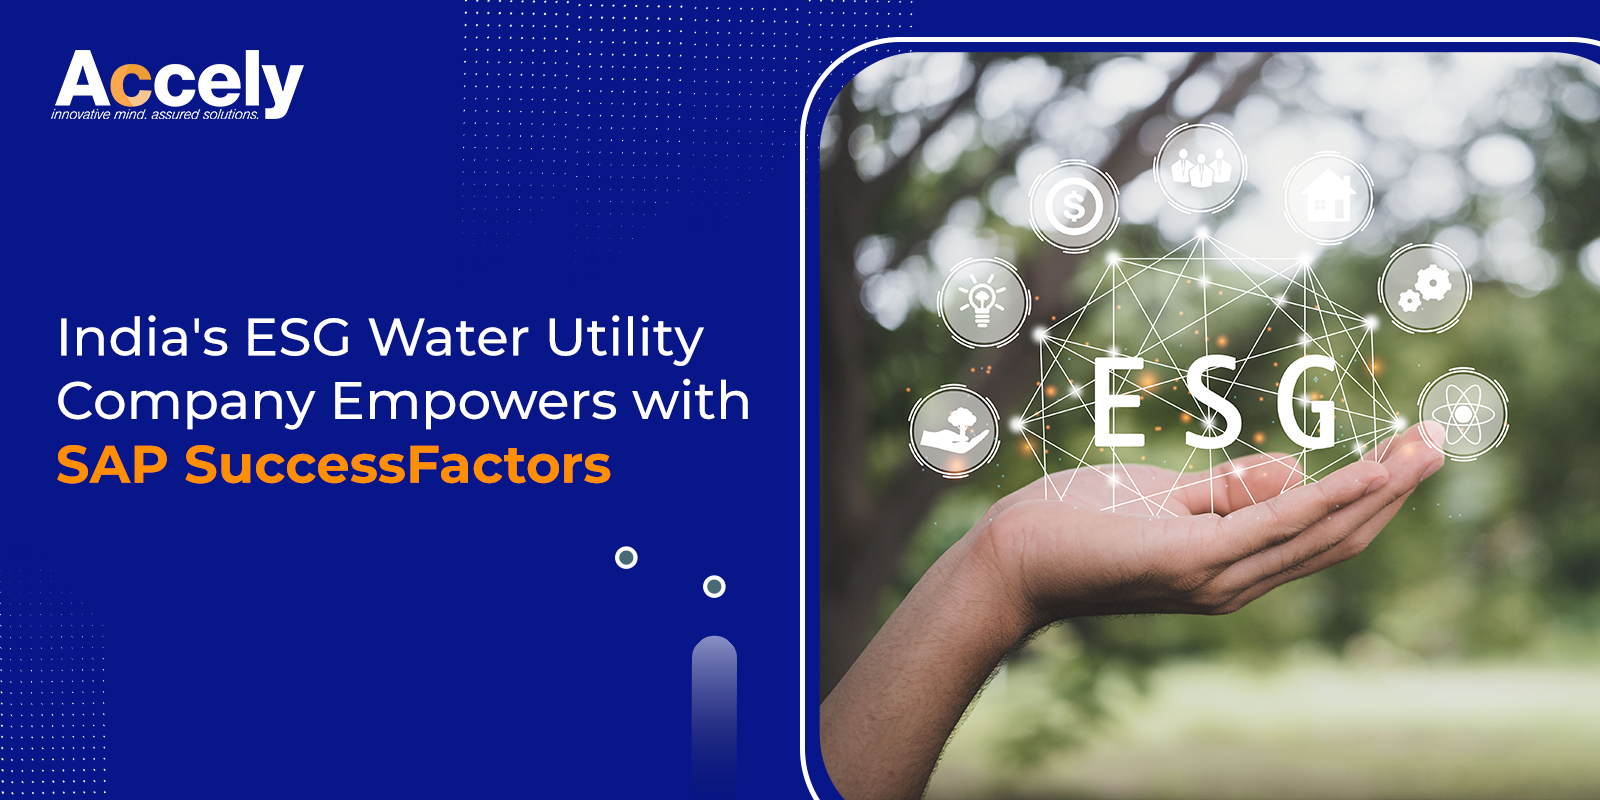 India's ESG Water Utility Company Empowers with SAP SuccessFactors